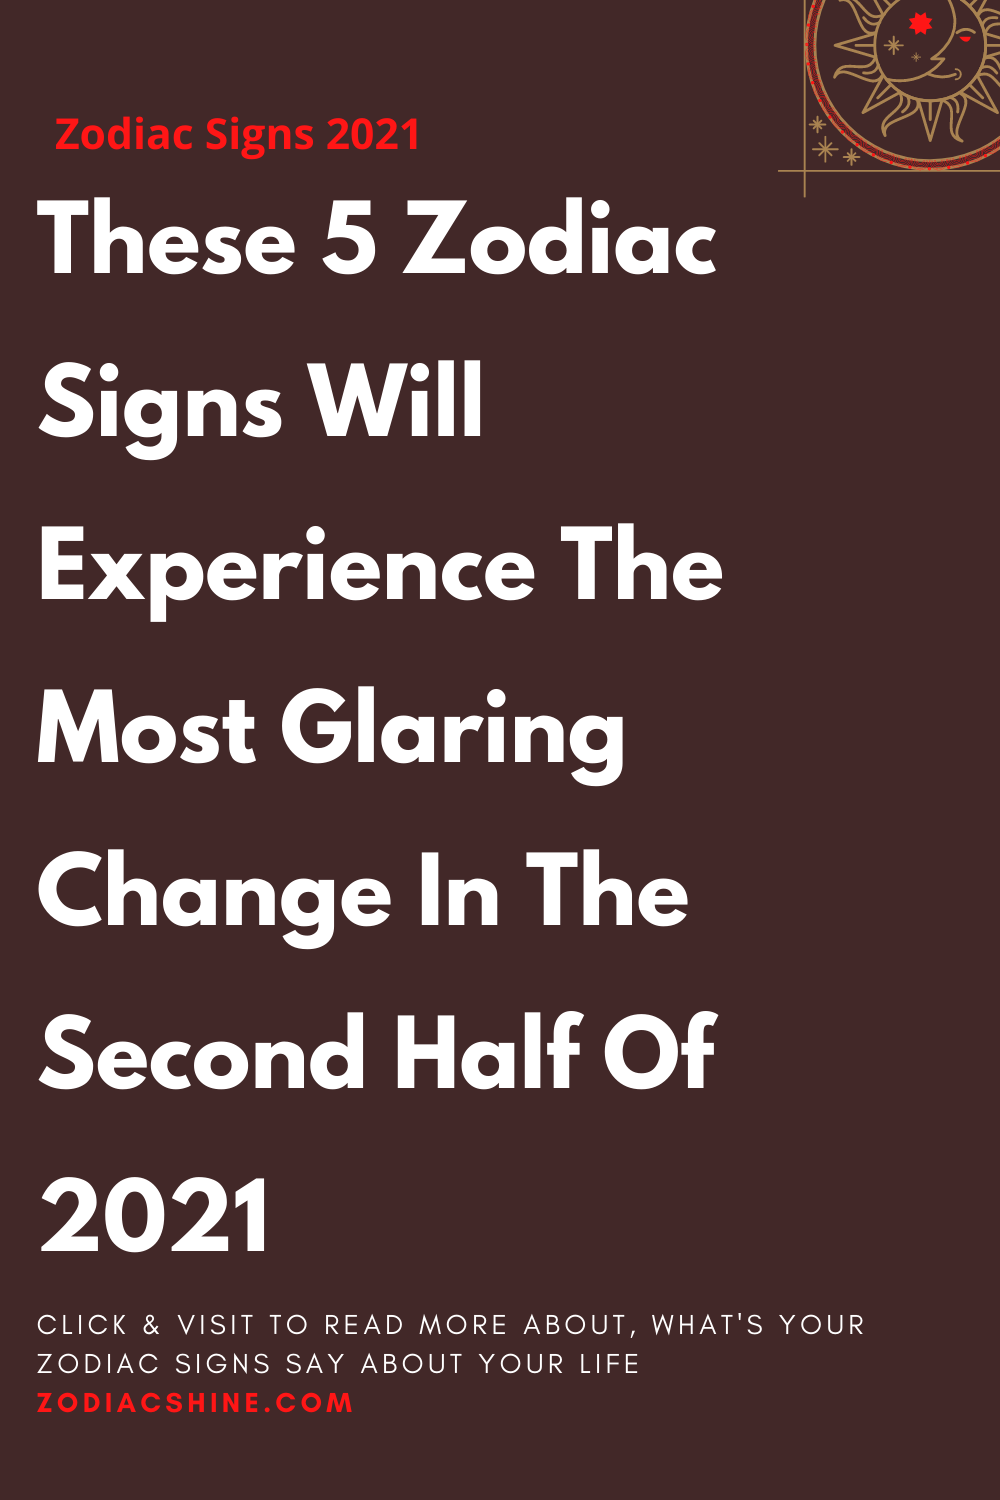 These 5 Zodiac Signs Will Experience The Most Glaring Change In The Second Half Of 2021